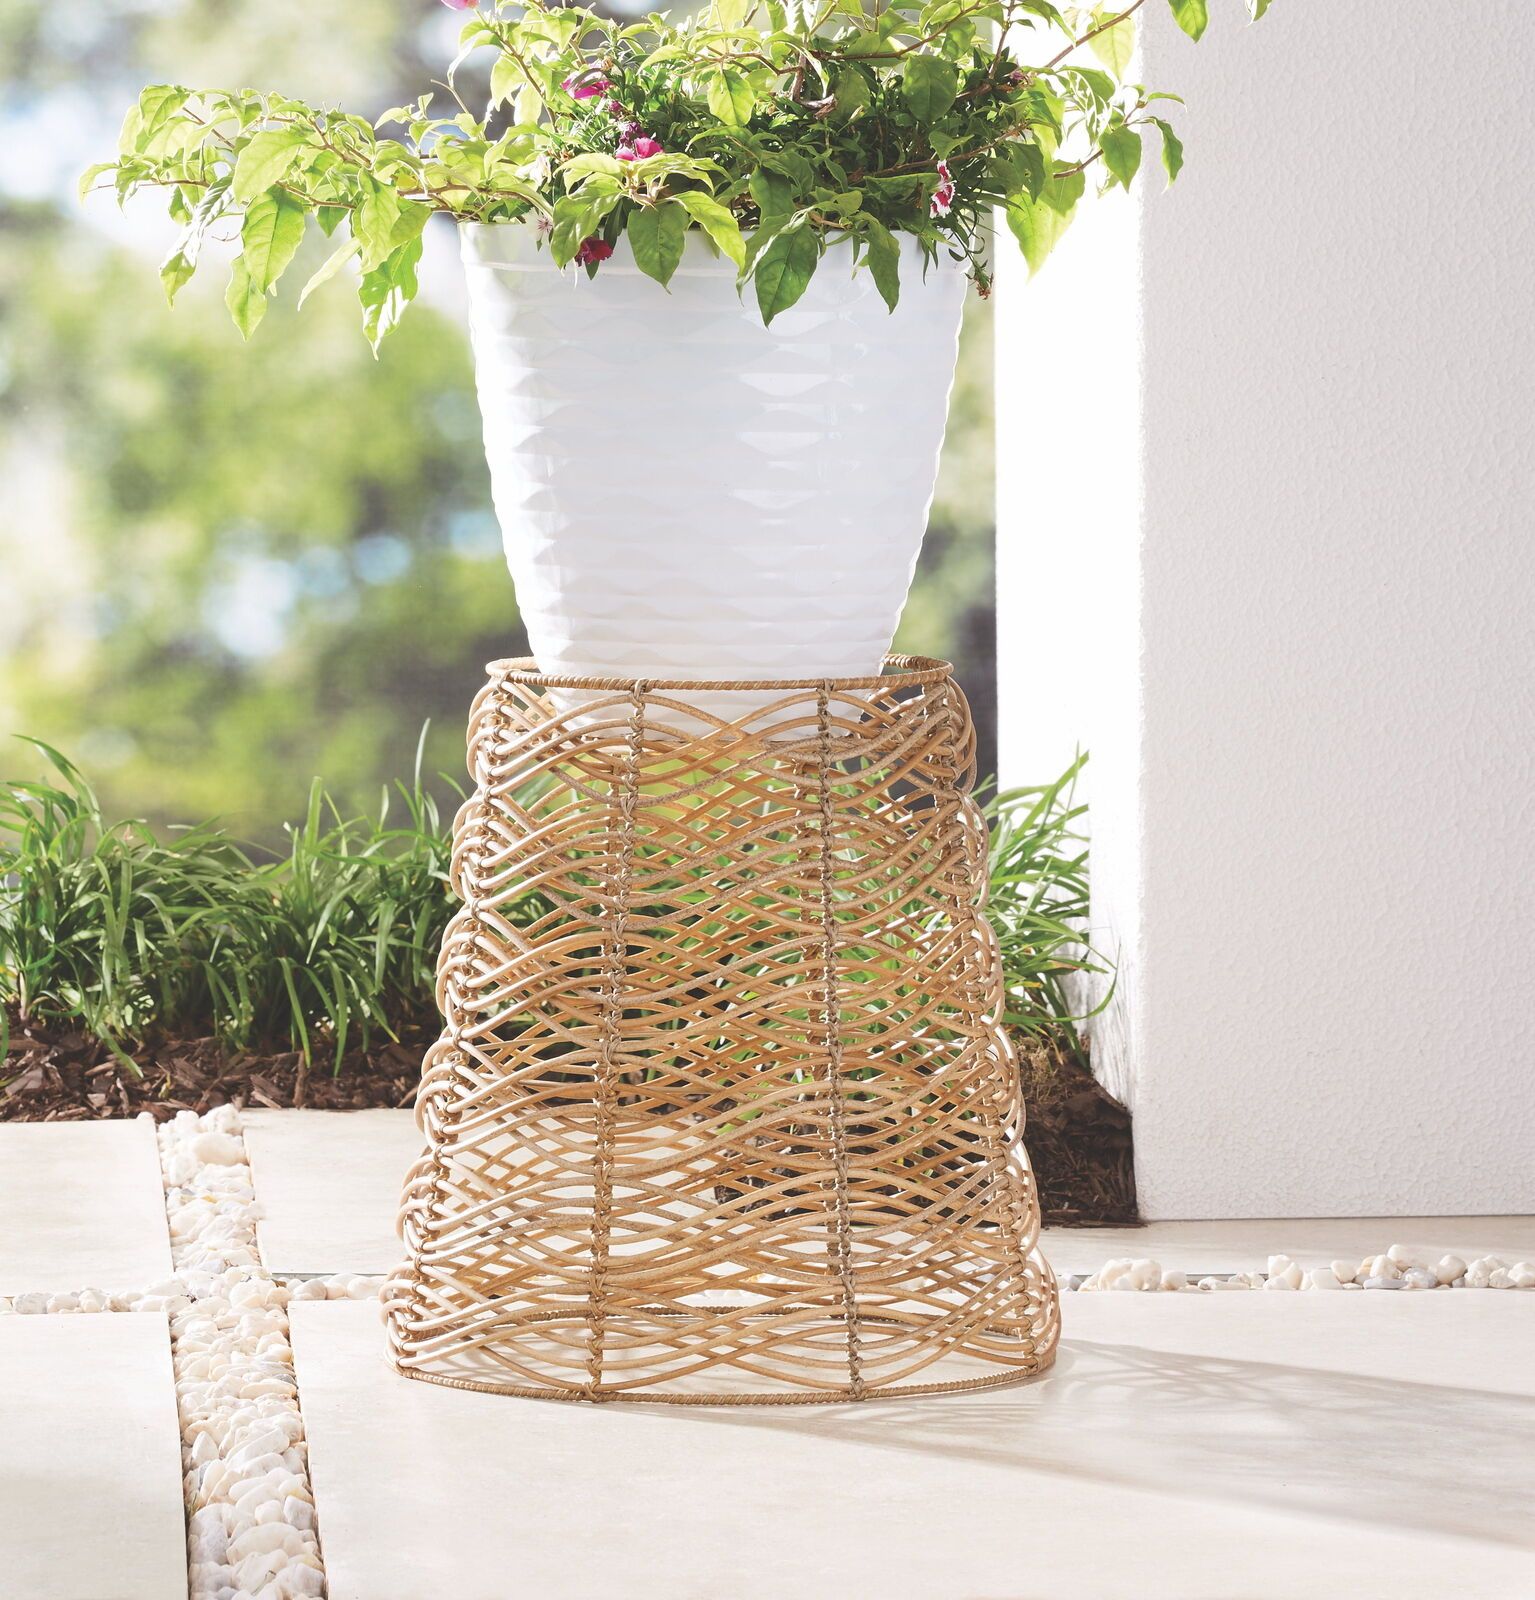 Ventura Resin Rattan Woven Plant Stand With Metal Frame Indoor Outdoor  Decor New | Ebay Regarding Resin Plant Stands (View 11 of 15)